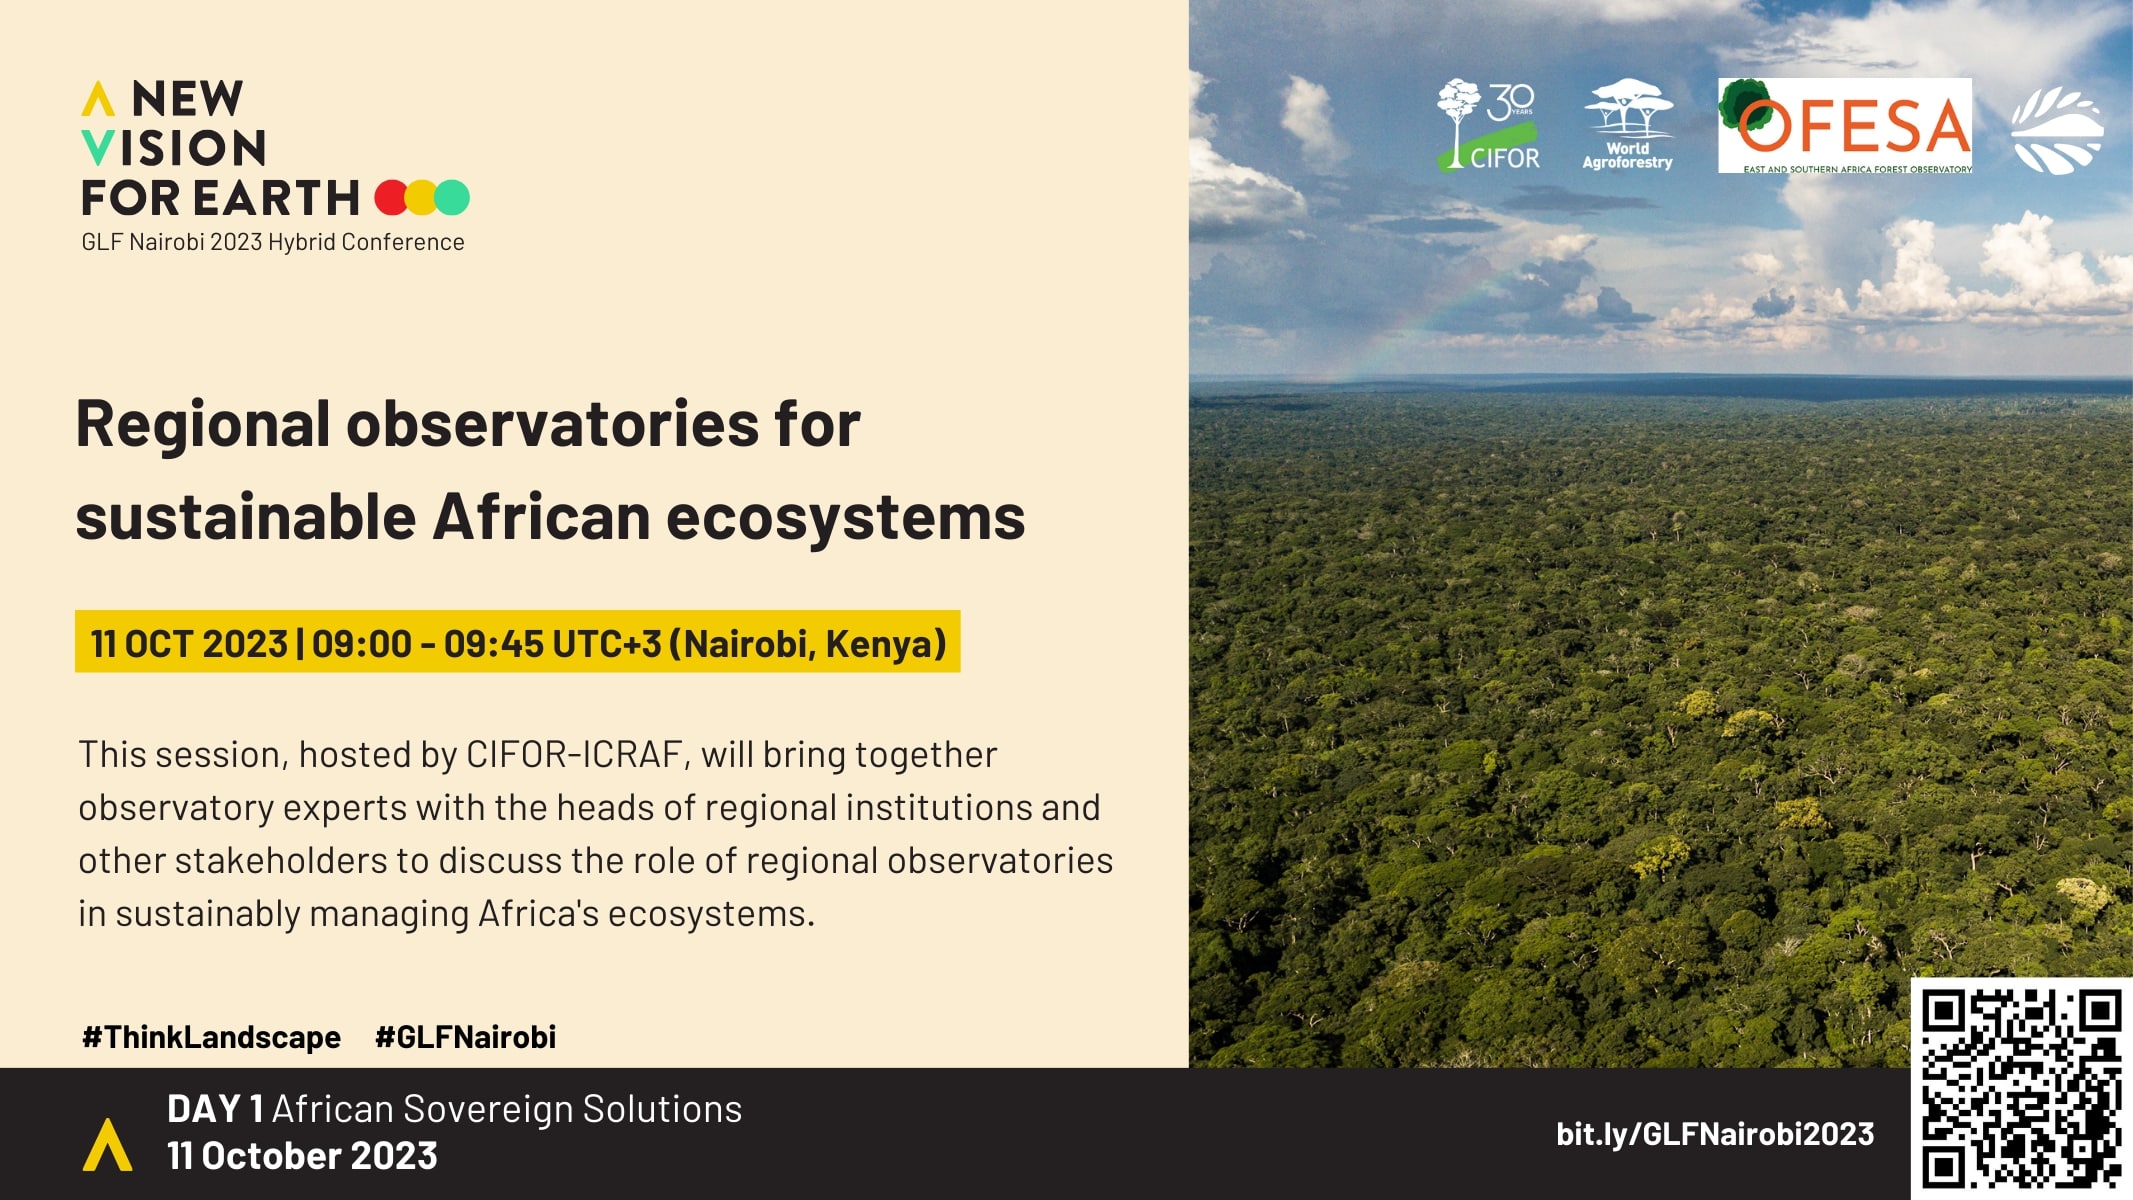 GLF Nairobi 2023: Understanding the role of regional observatories in ensuring sustainable ecosystemsin Africa - the case of the East and Southern Africa Forest Observatory (OFESA) and the Central Africa Forest Observatory (OFAC)